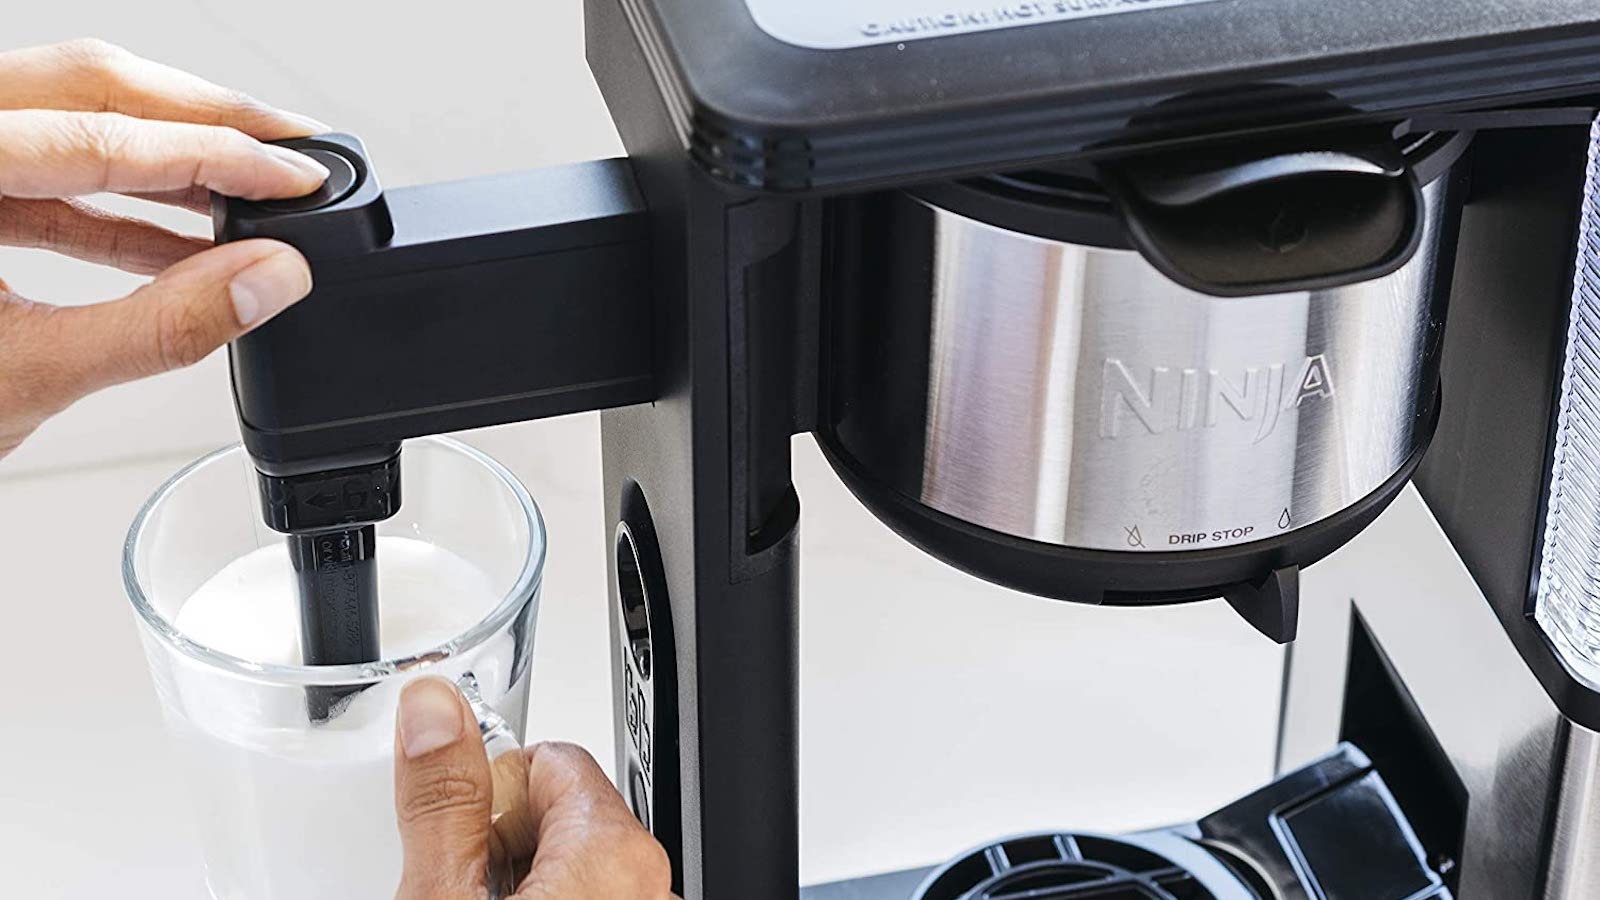 Ninja Specialty Coffee Maker brings cafe-quality home with six brew sizes